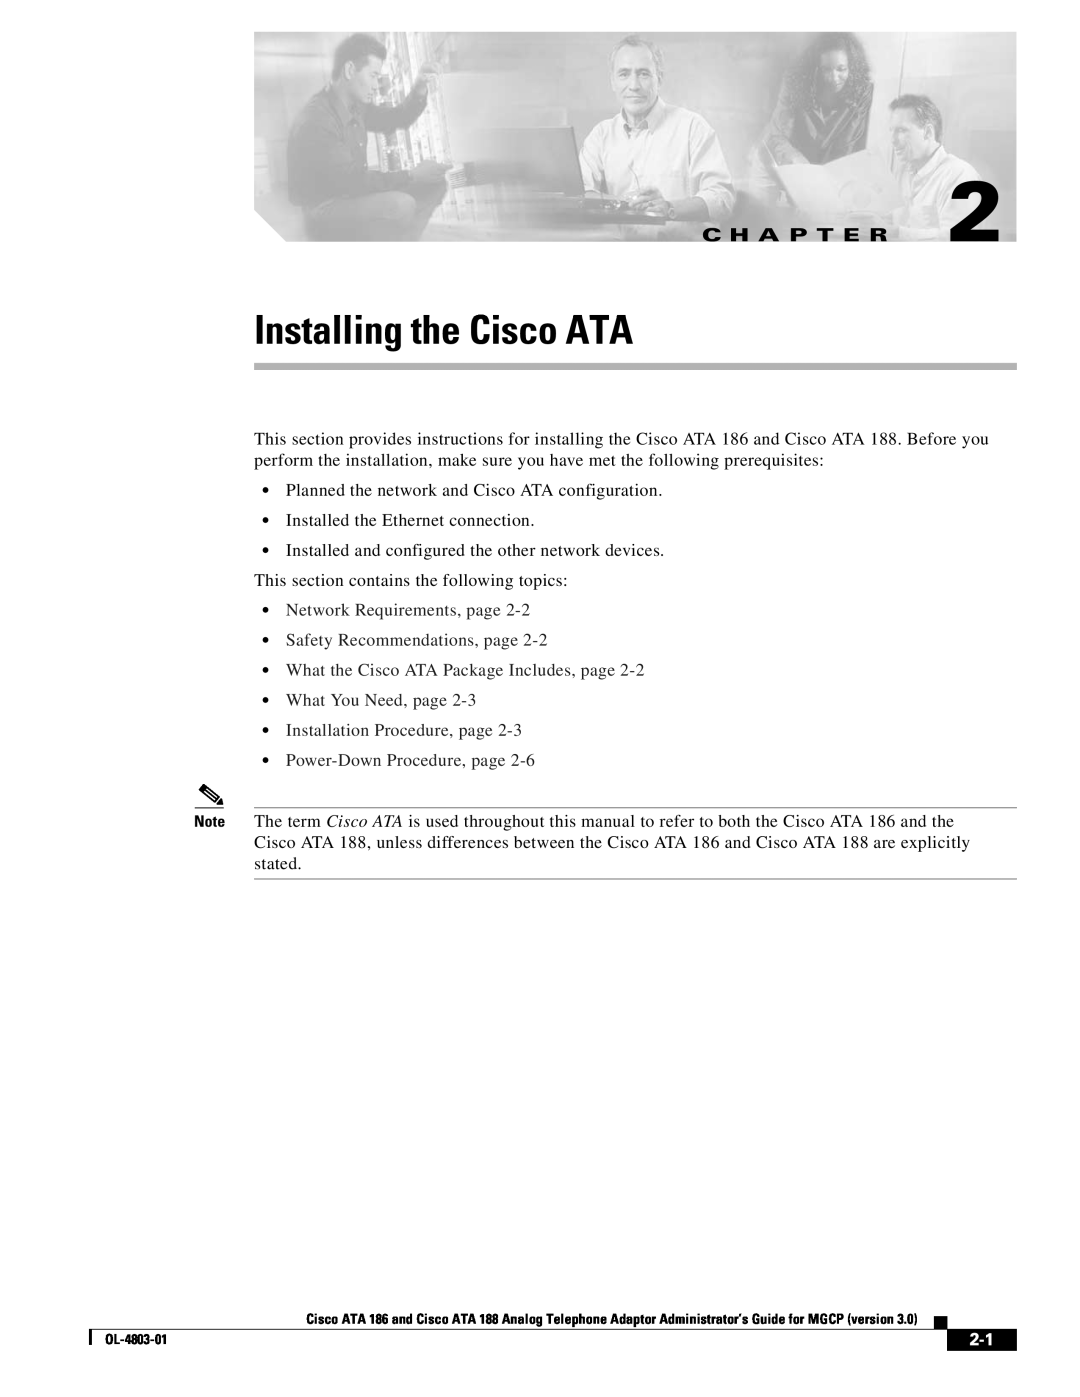 Cisco Systems ATA 186 Installing the Cisco ATA, Network Requirements, page Safety Recommendations, page, C H A P T E R 